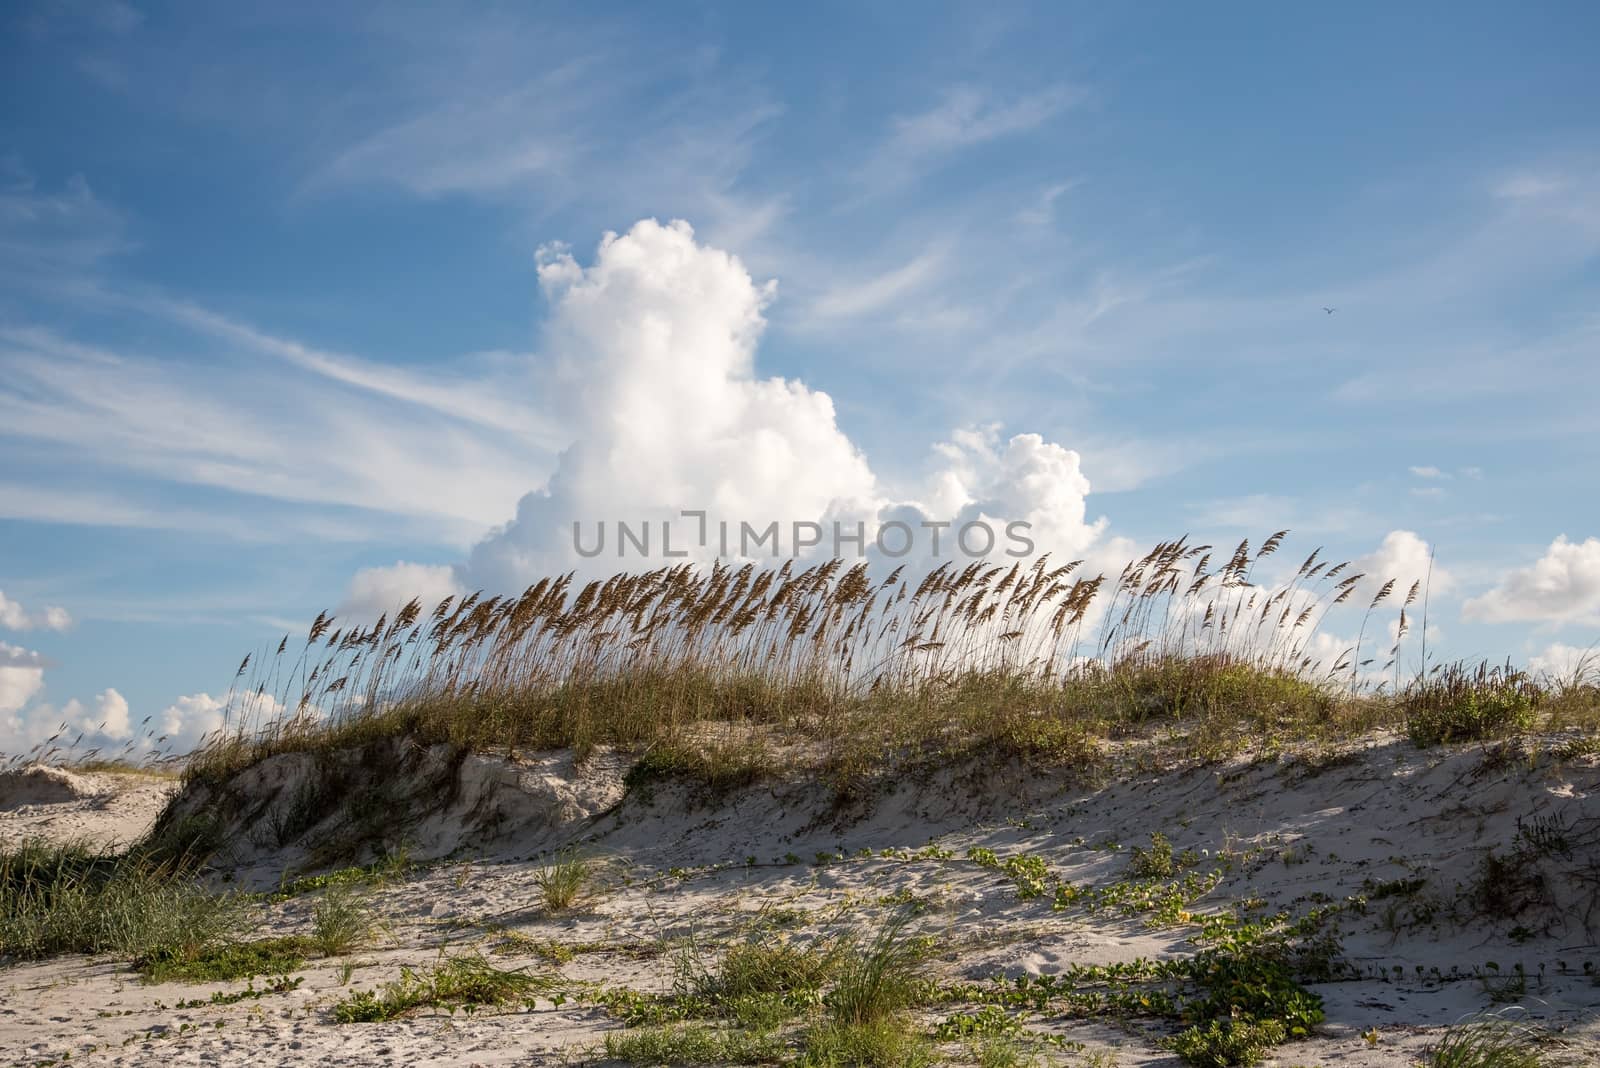 Clouds and sea oats on the beach